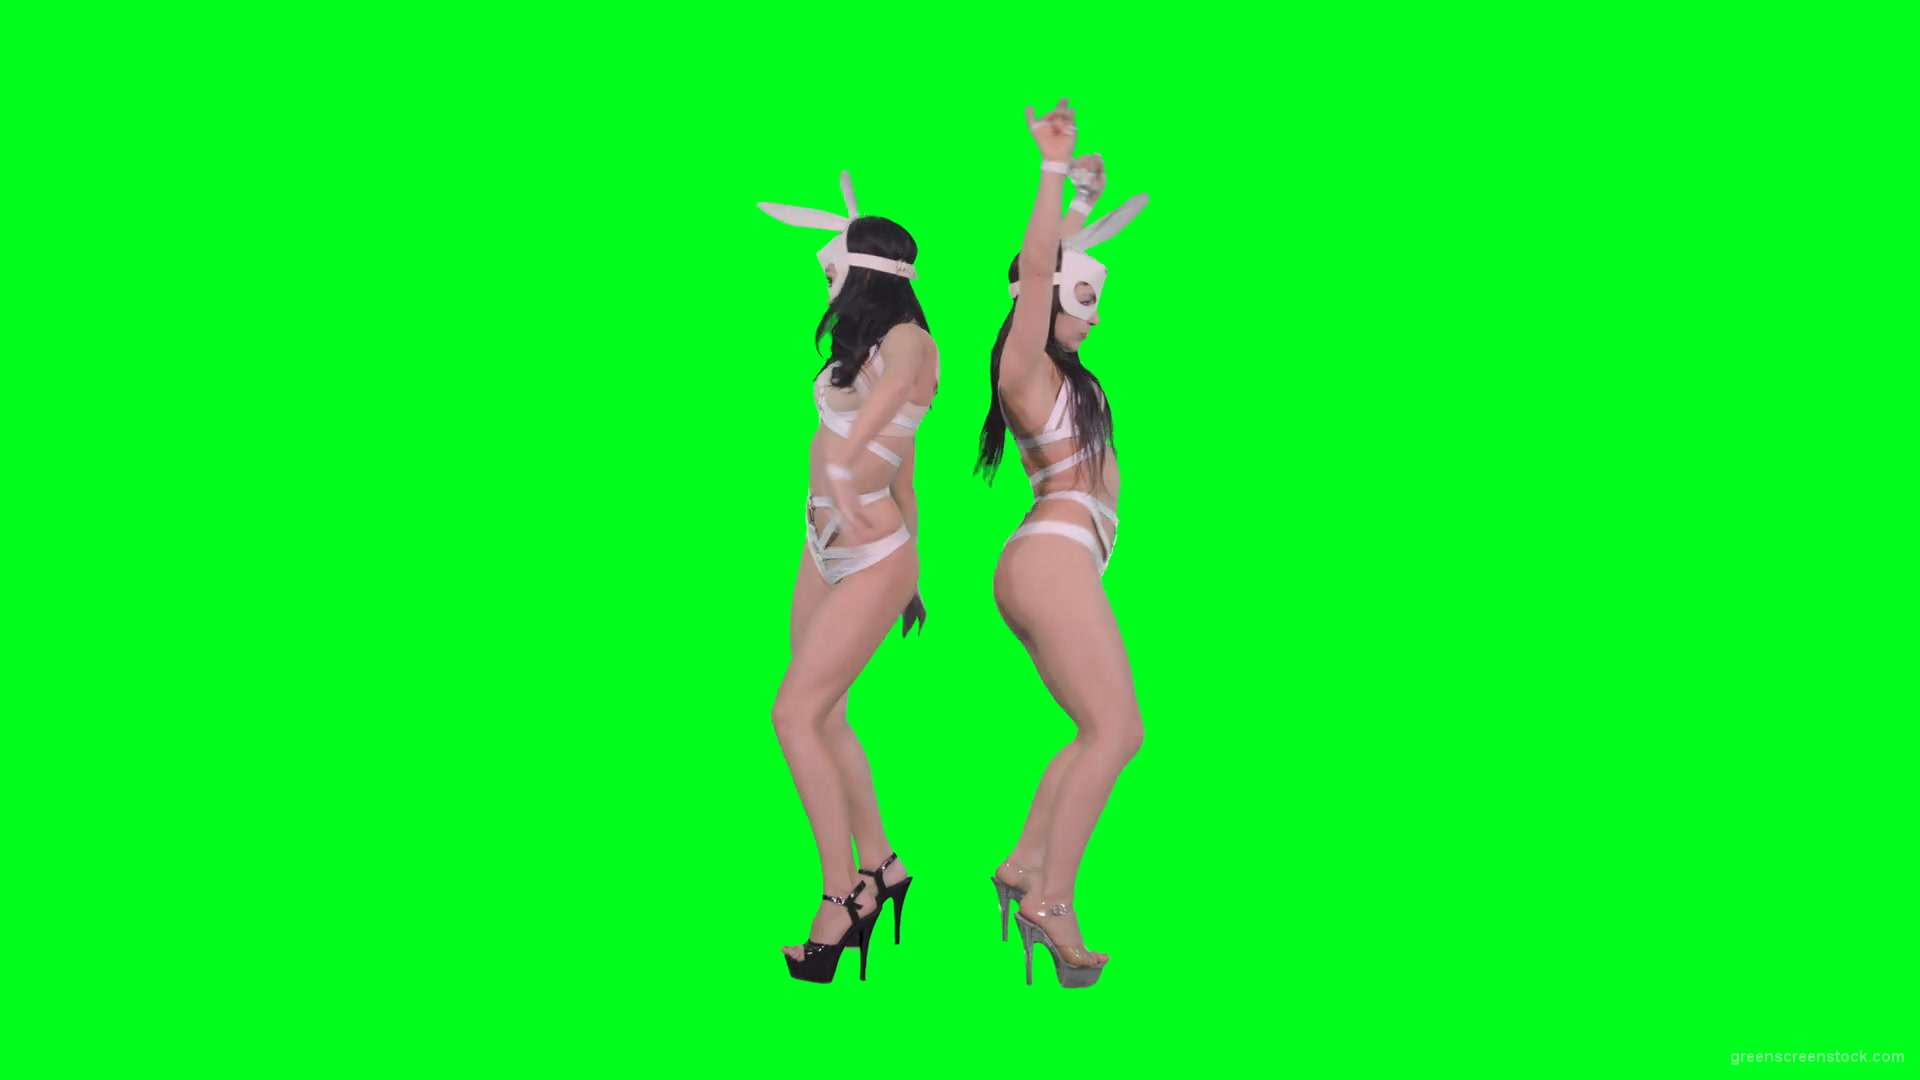 Go-Go-Dancing-female-team-duet-making-erotic-moves-on-green-screen-4K-Video-Footage-1920_009 Green Screen Stock